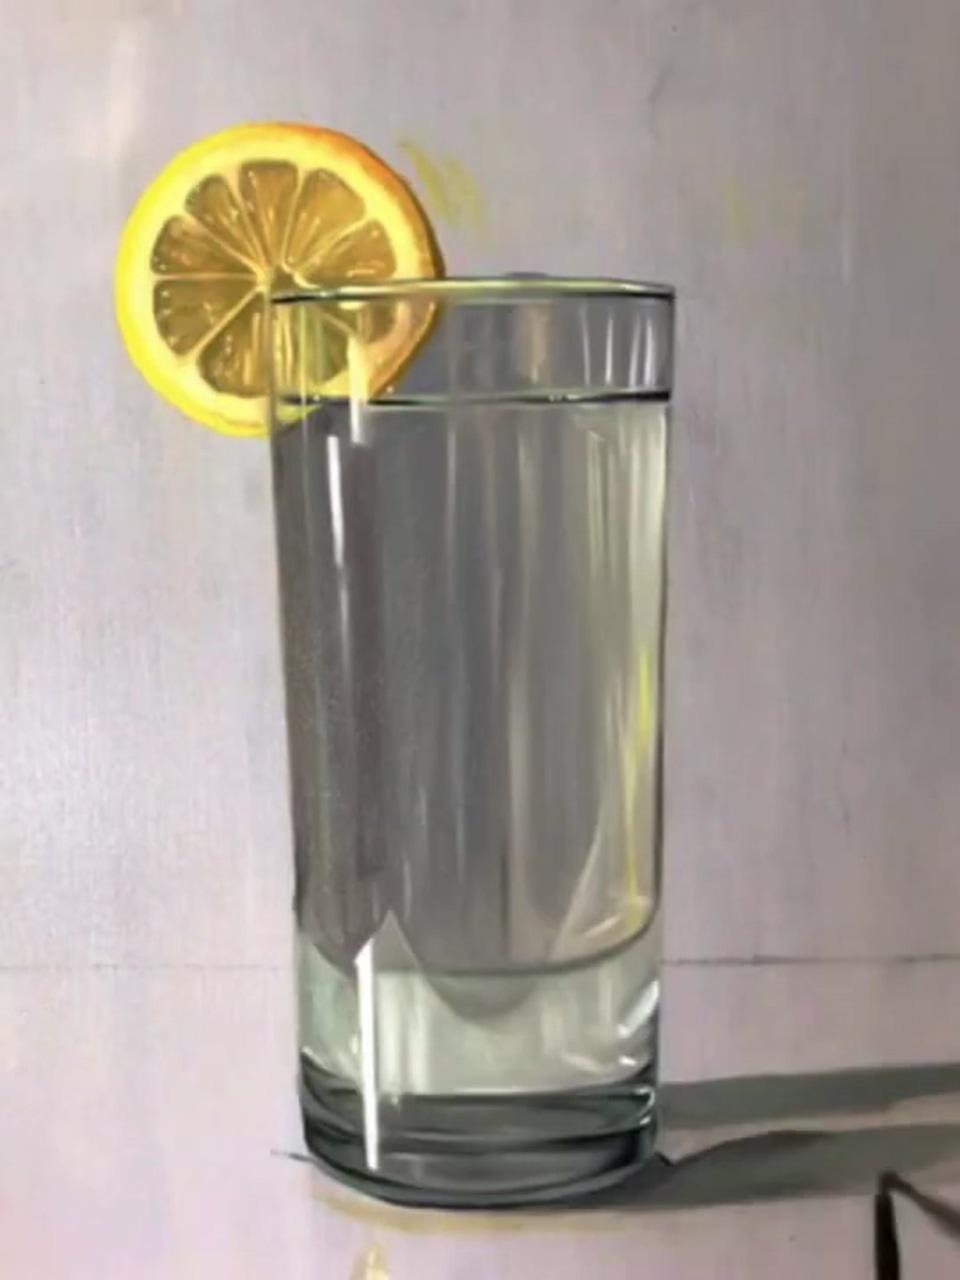 Oil painting time-lapse, water glass and lemon slice; oil painting videos